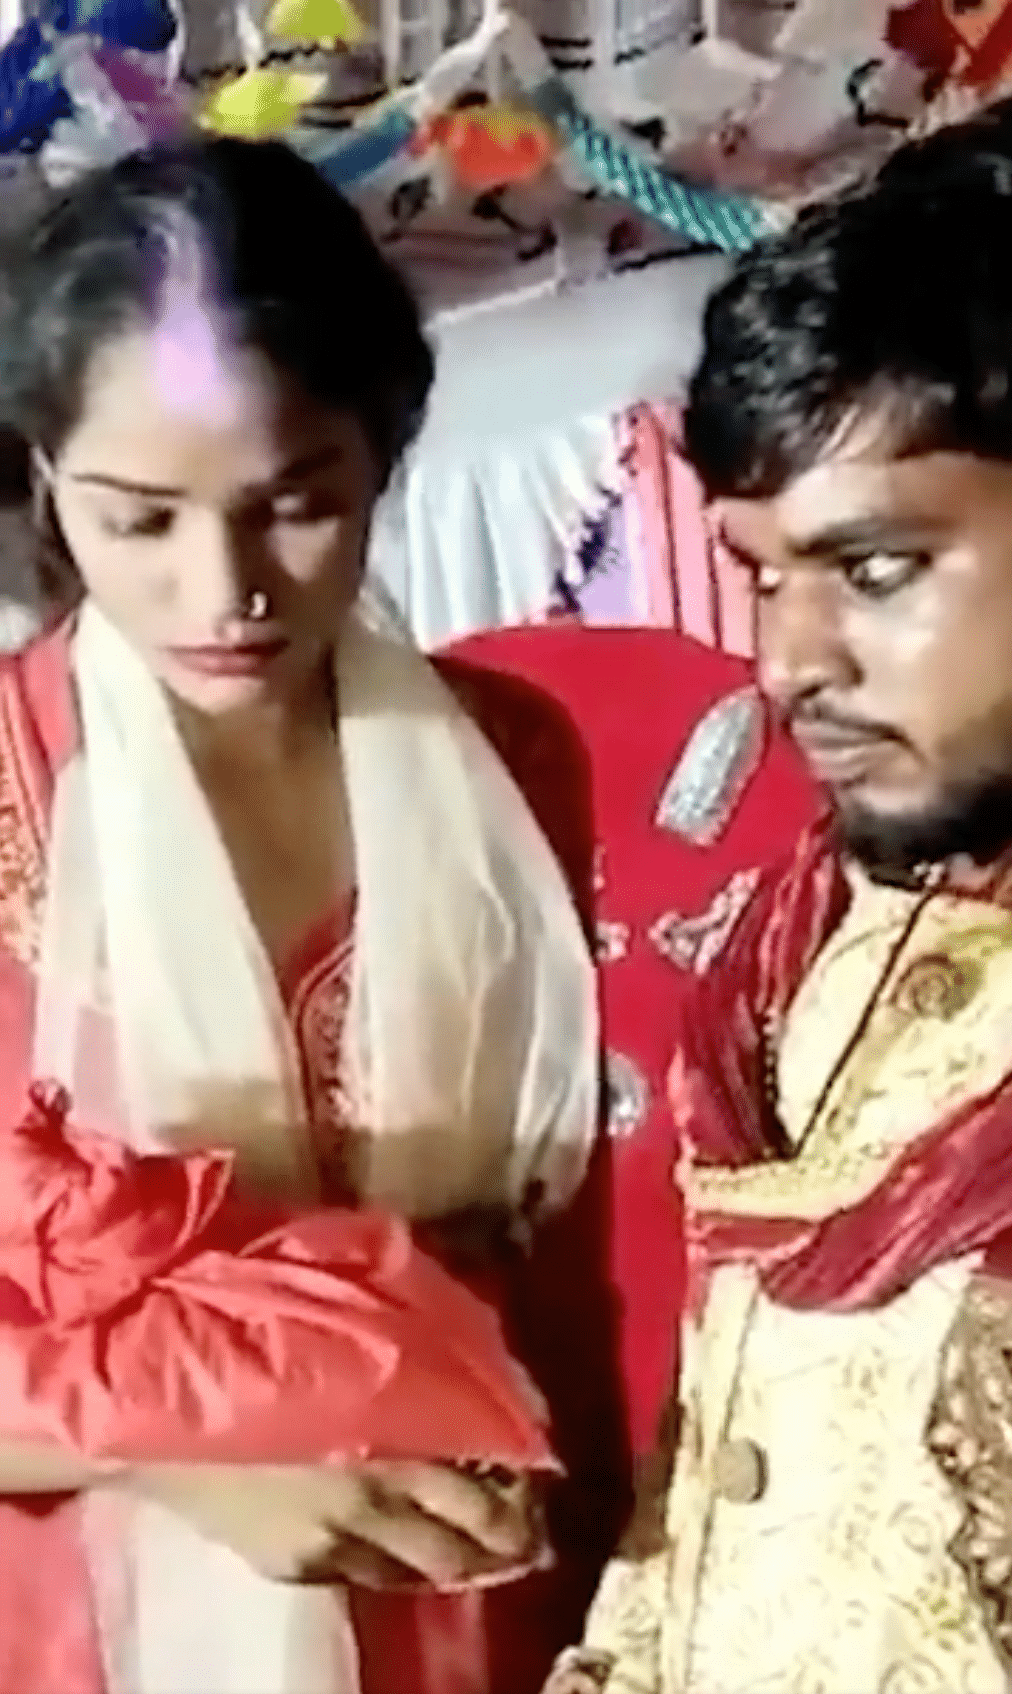 Rajesh, the groom, was in relationship with the to-be-bride Rinku's younger sister Putul